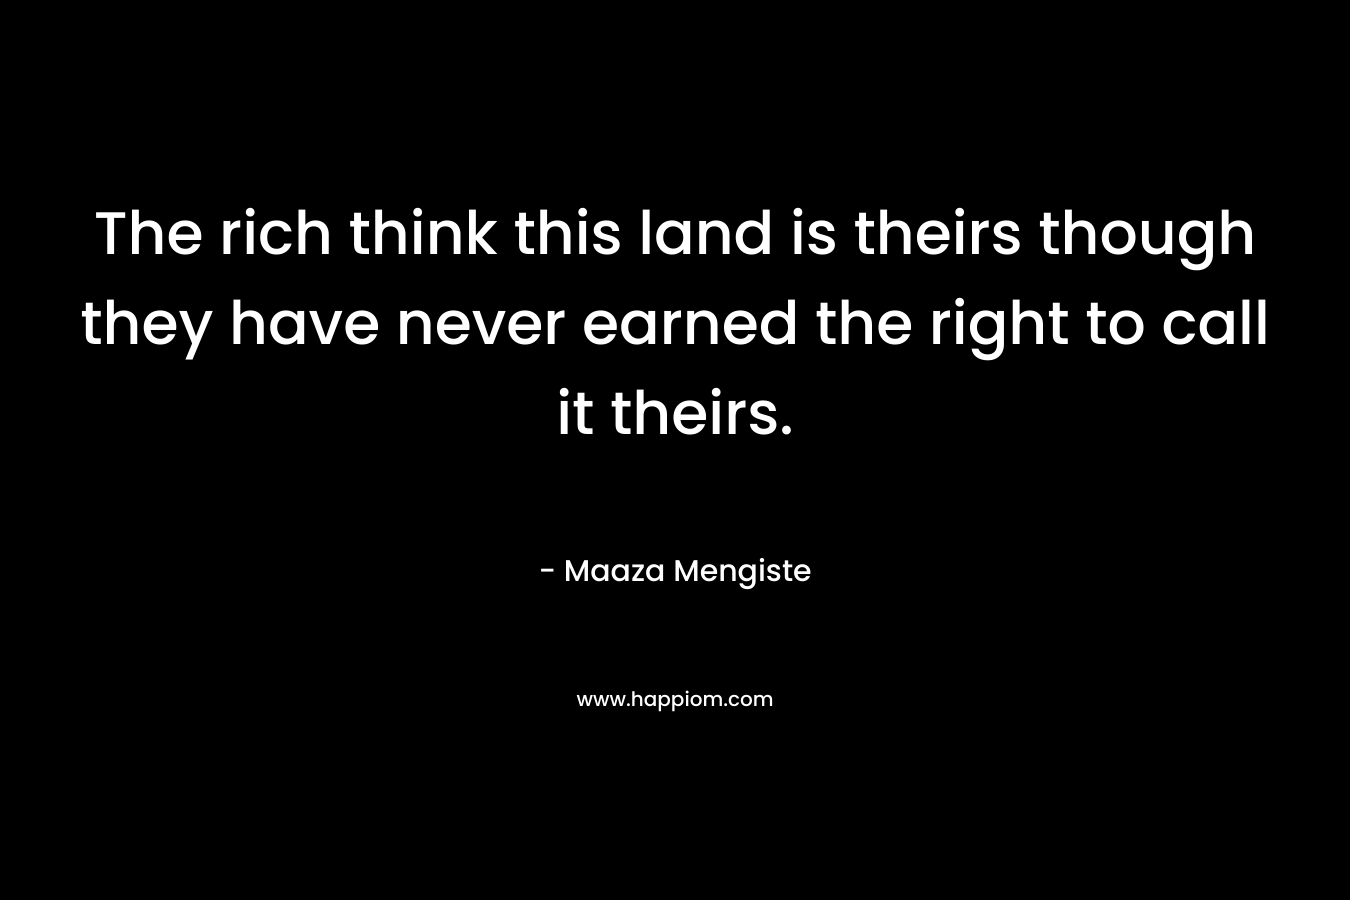 The rich think this land is theirs though they have never earned the right to call it theirs.